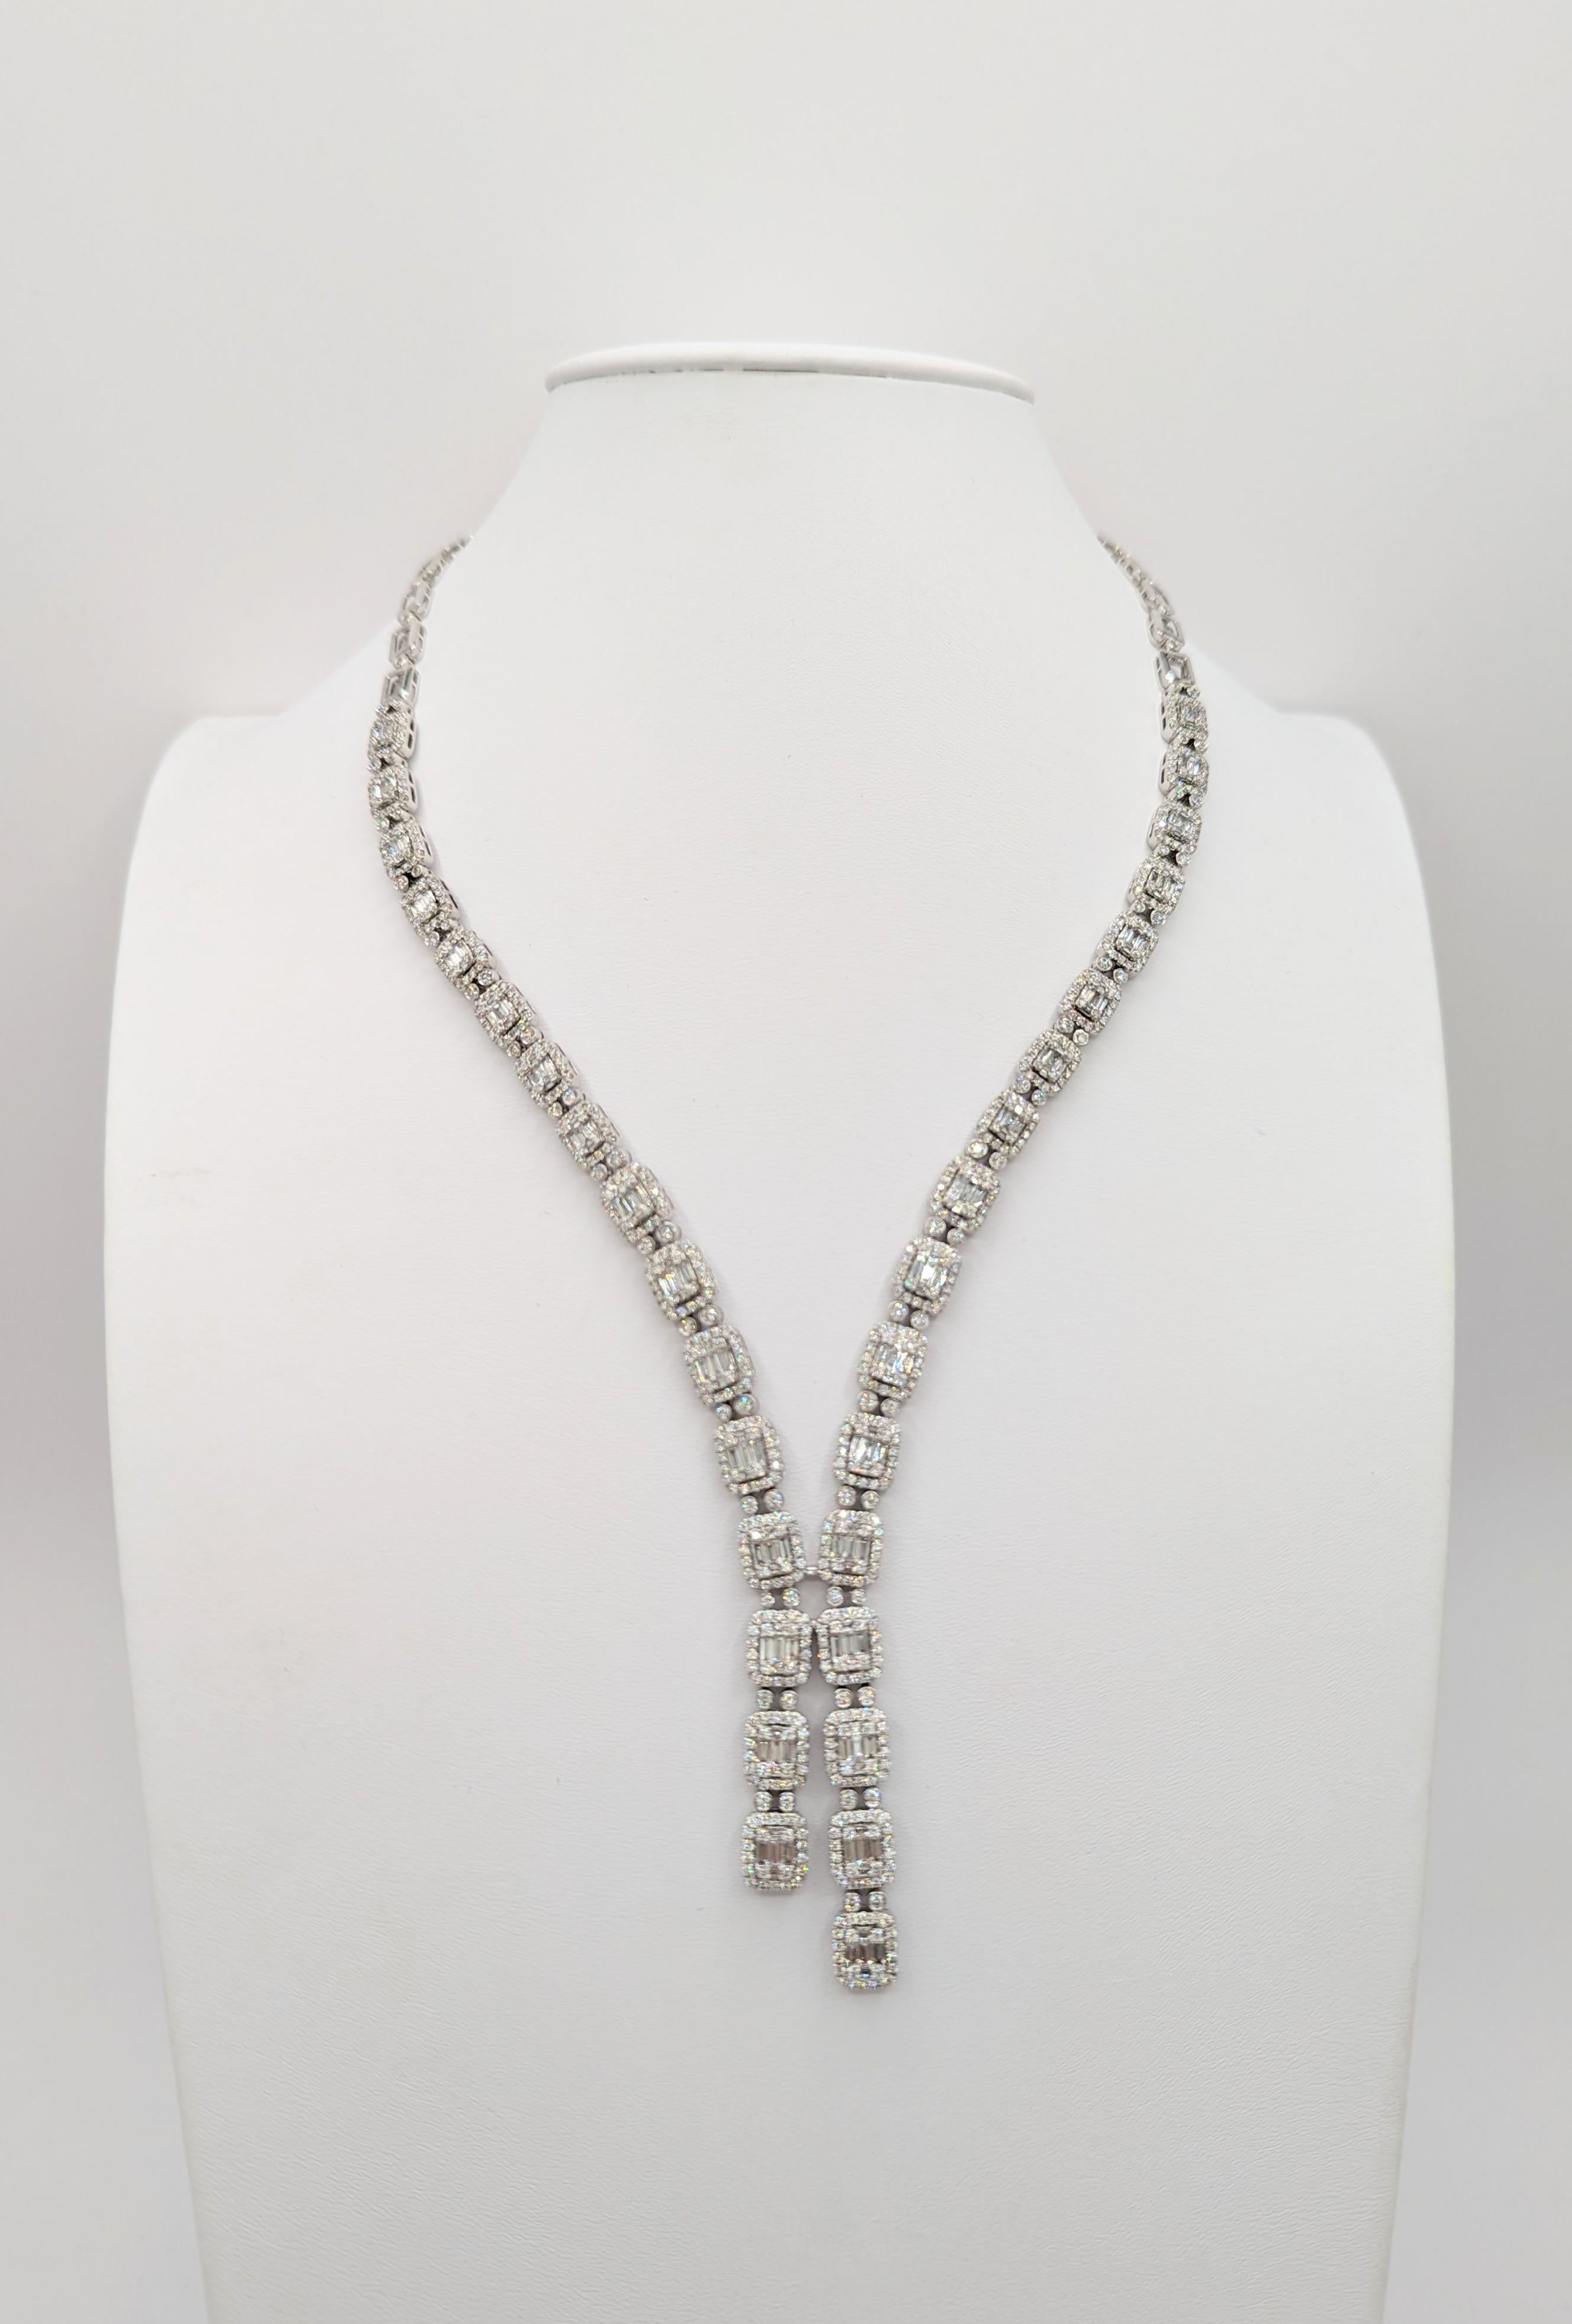 White Diamond Baguette and Round Necklace in 18 Karat White Gold In New Condition For Sale In Los Angeles, CA